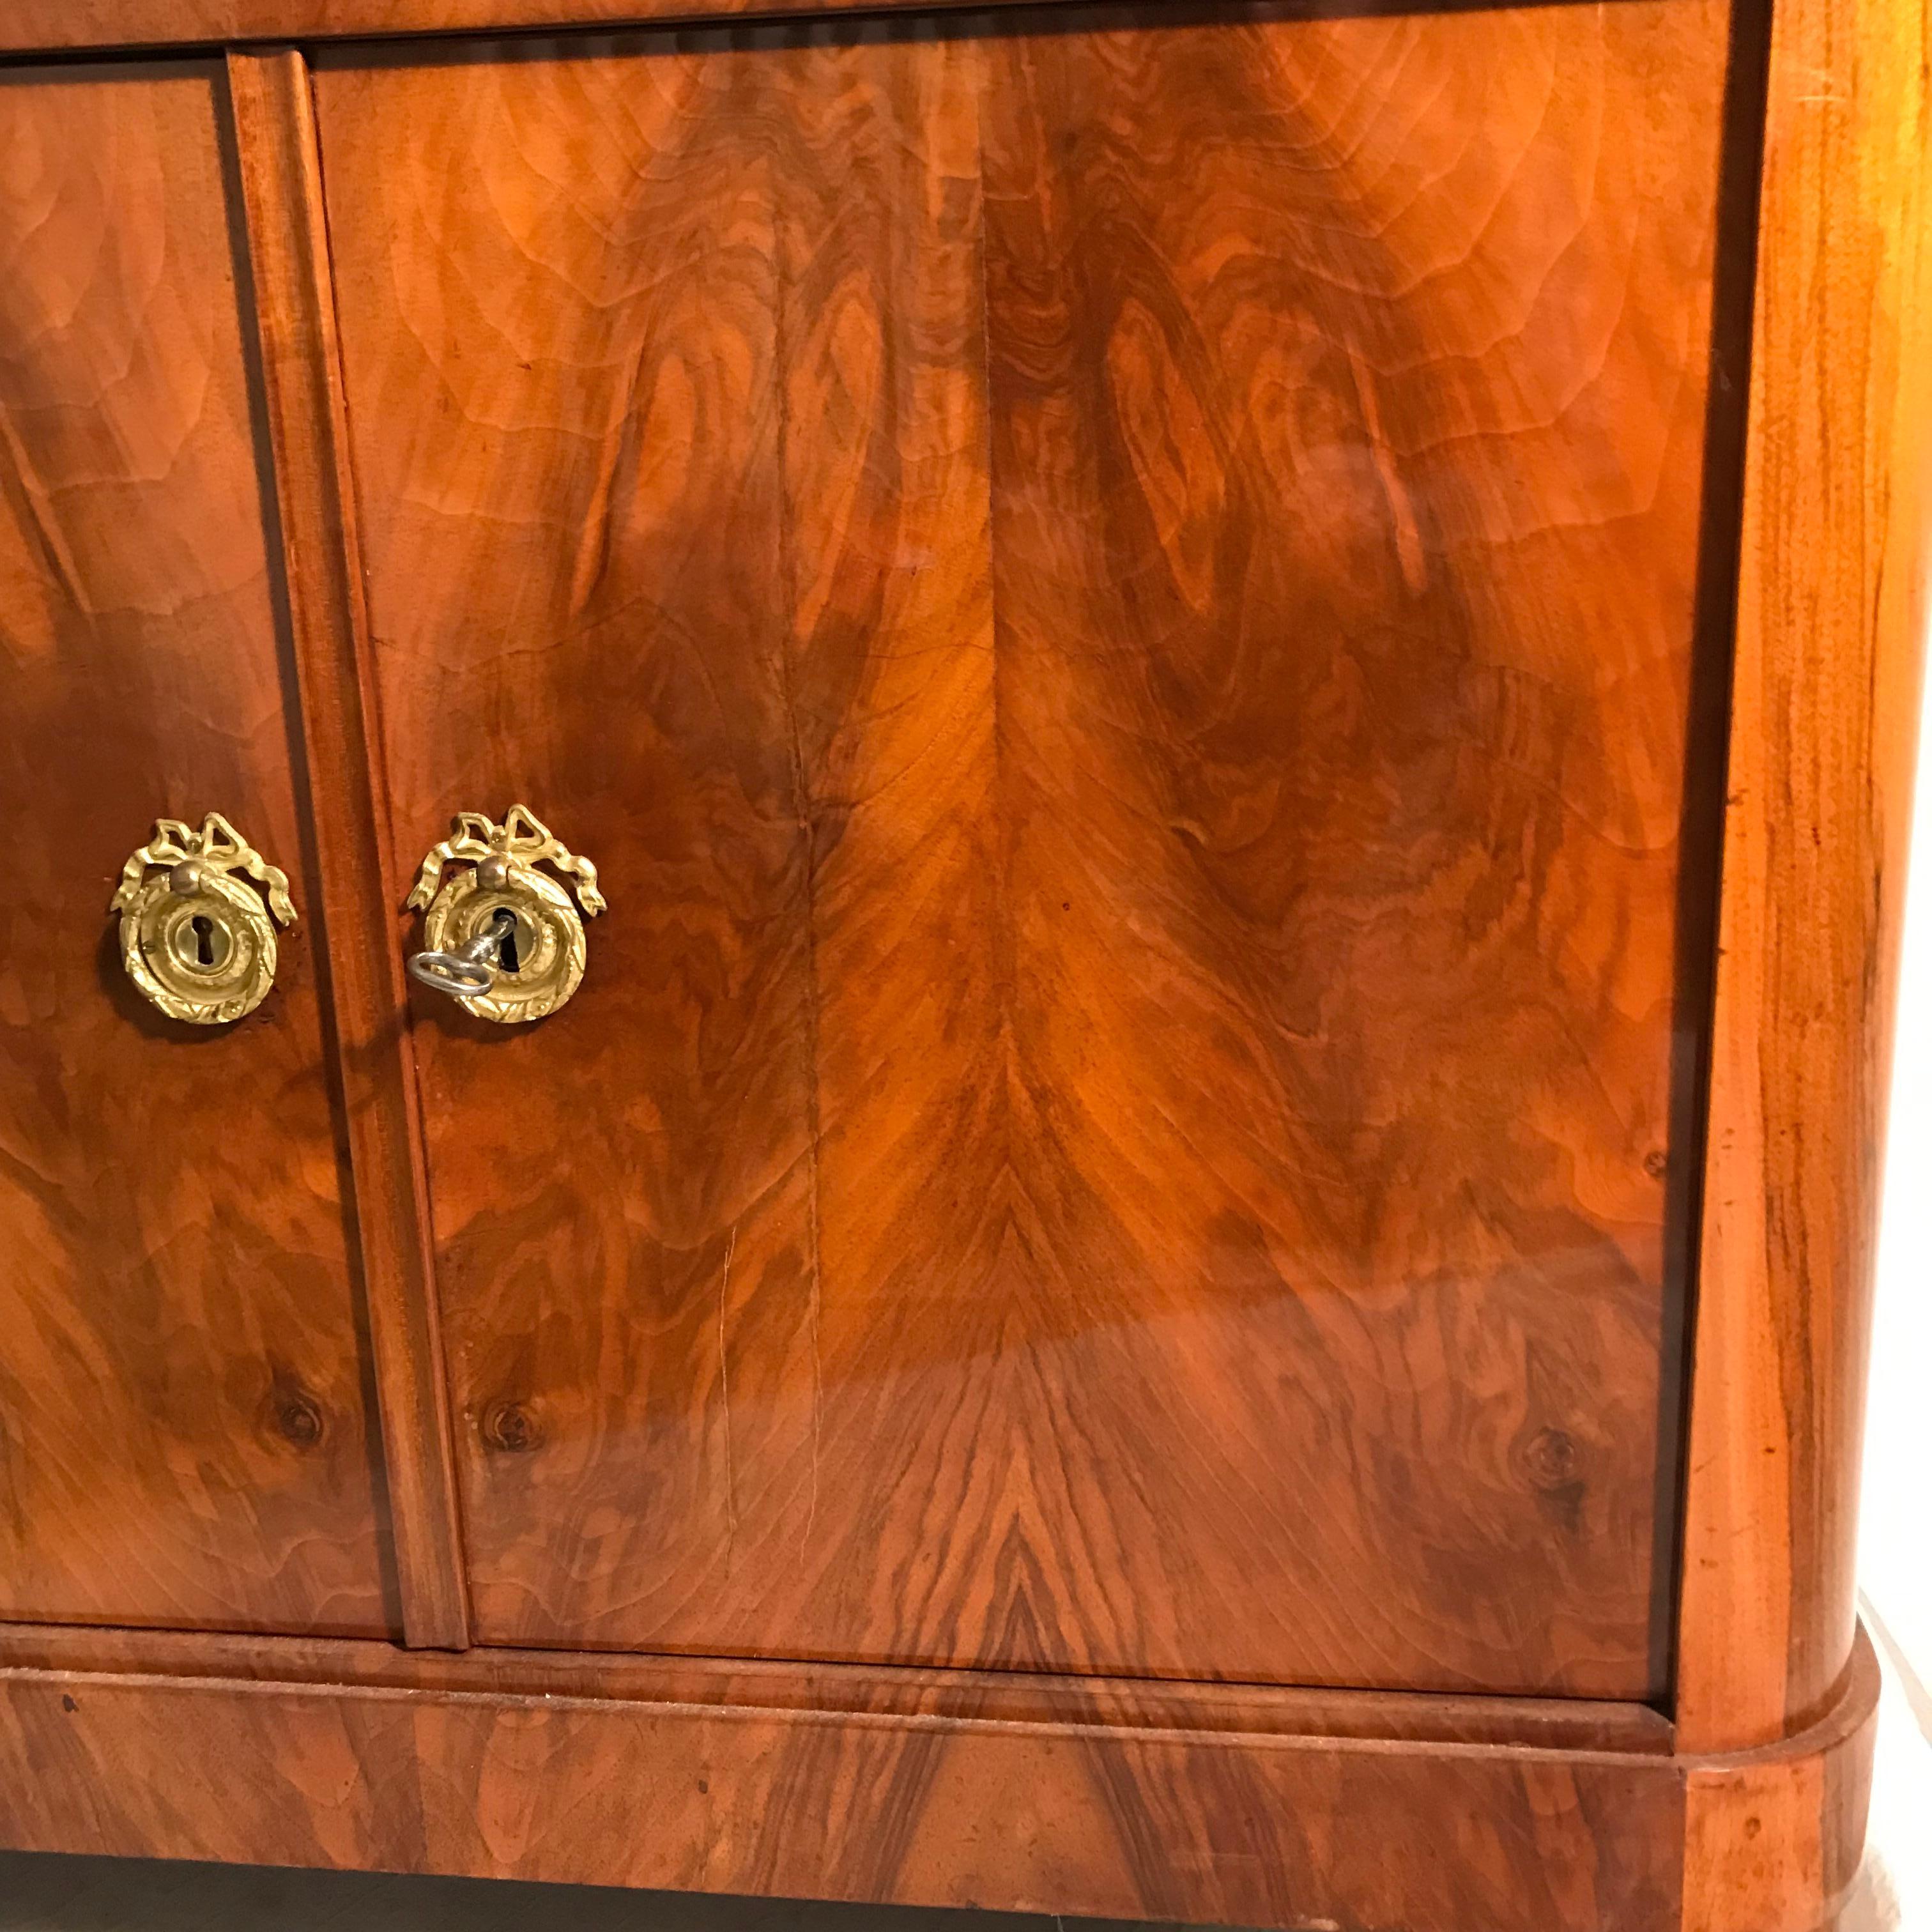 Classic Biedermeier fall top desk, South German, 1820, walnut veneer on the outside and mahogany veneer on the inside. It has a beautiful veneer grain. The desk has been refinished in the past and is in good condition. There is one veneer crack on